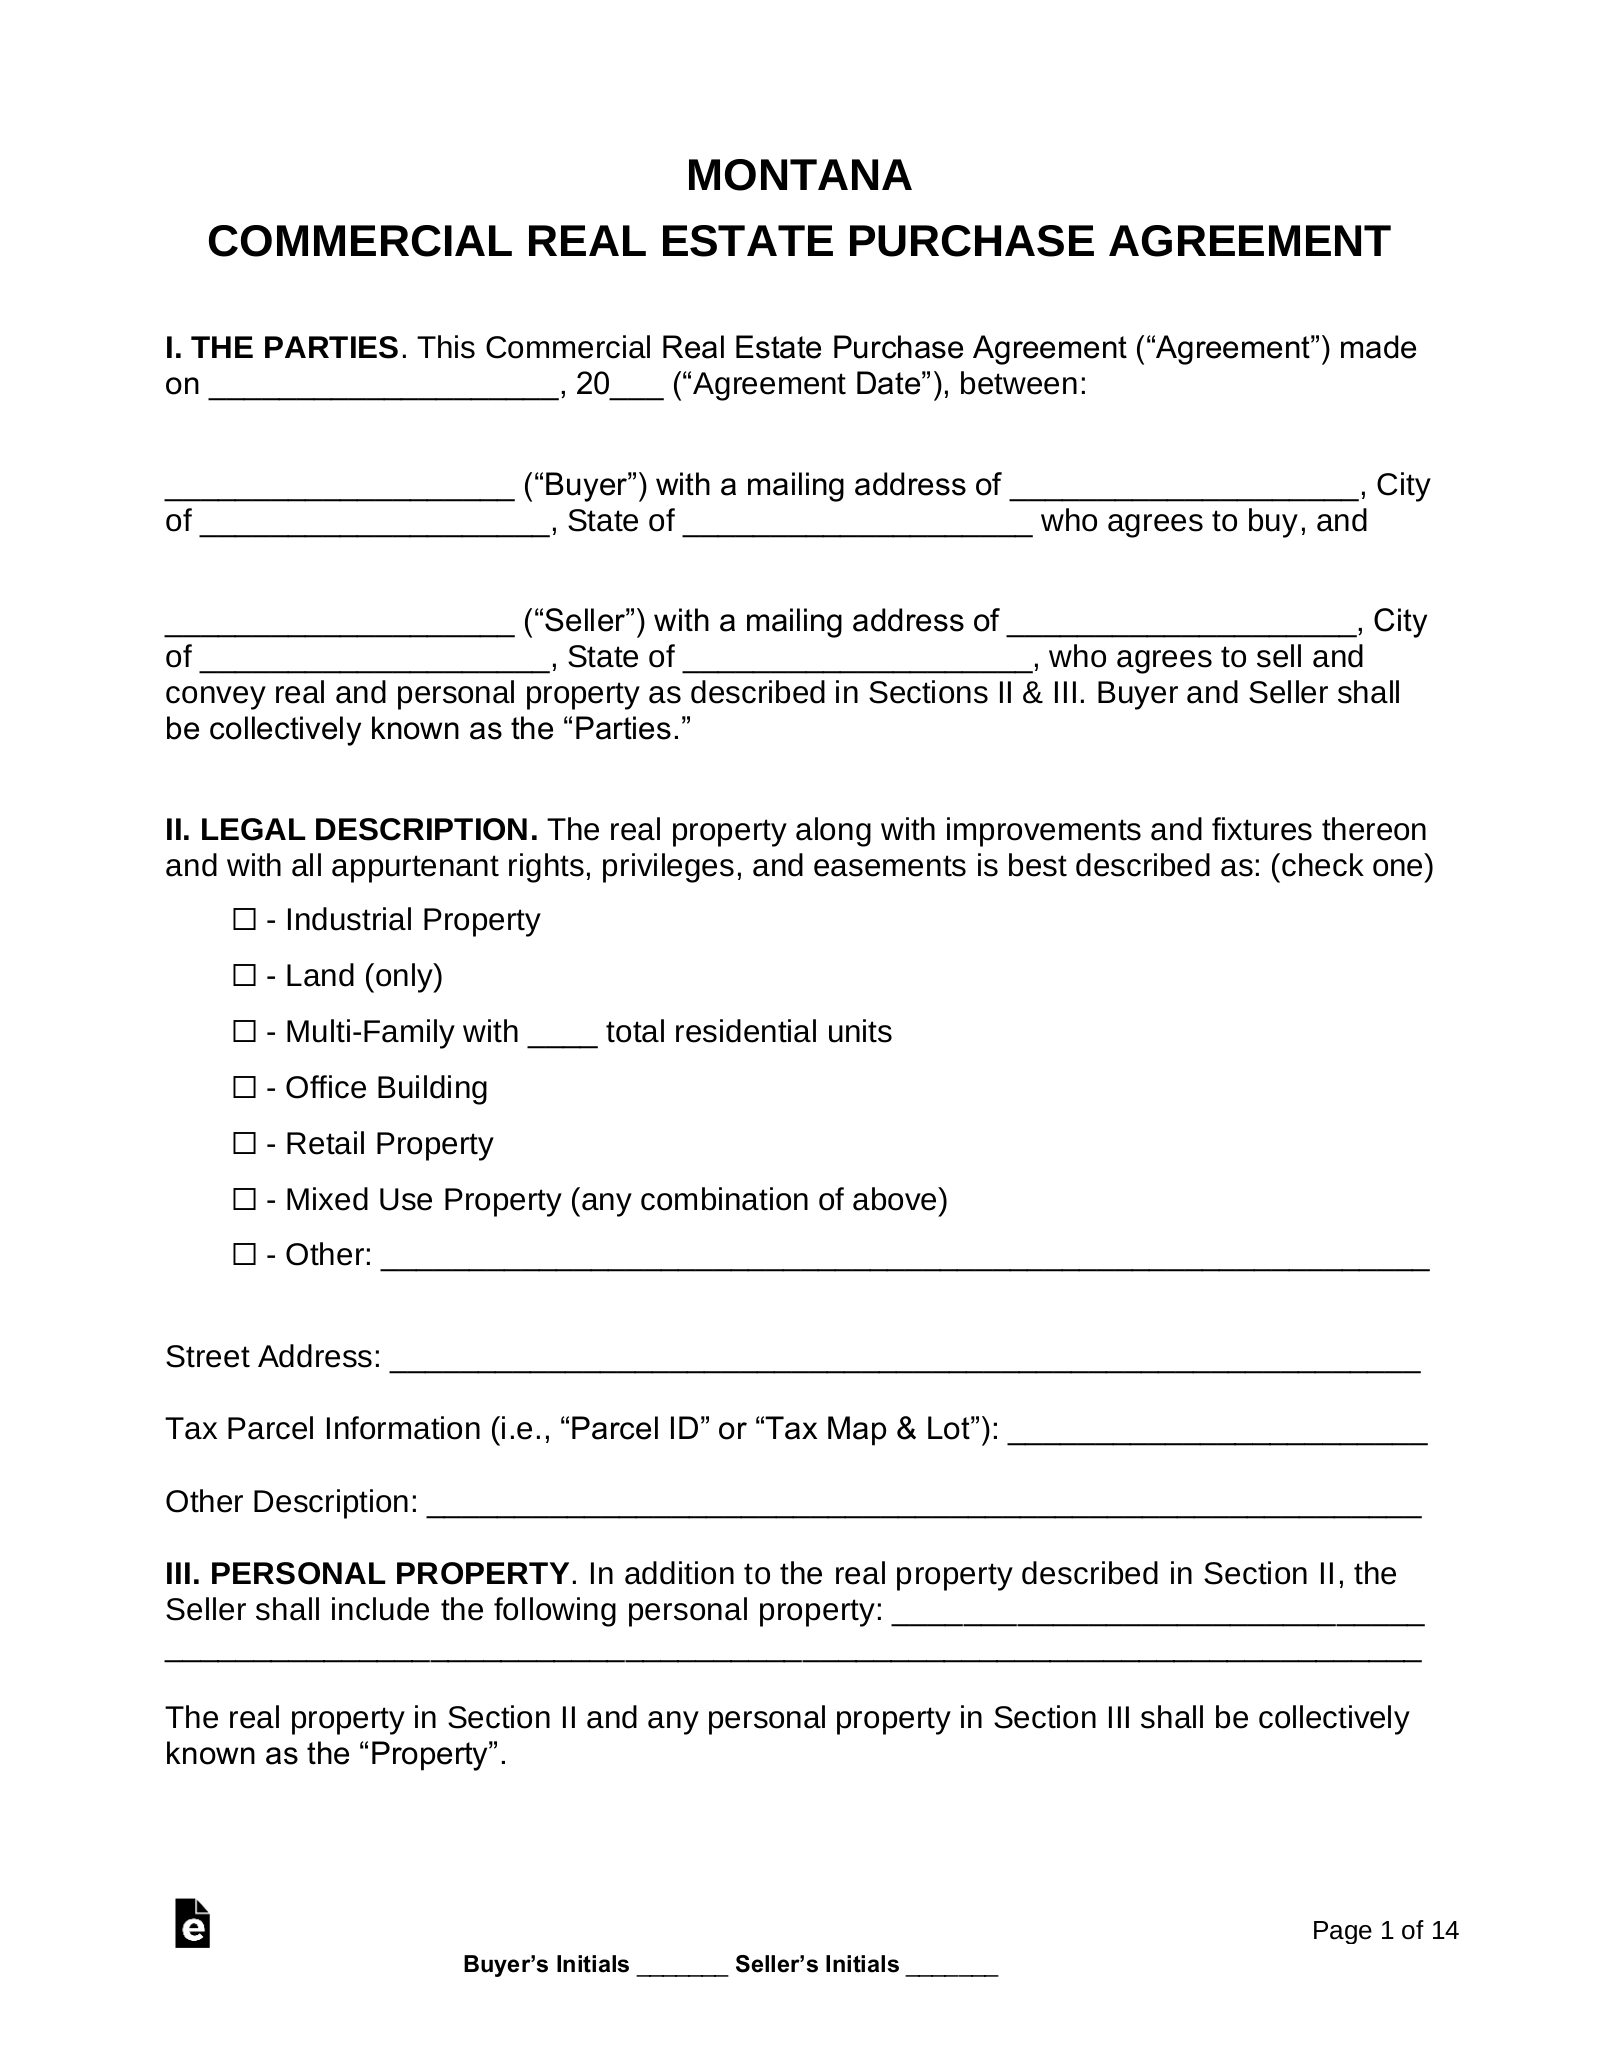 Montana Commercial Real Estate Purchase and Sale Agreement